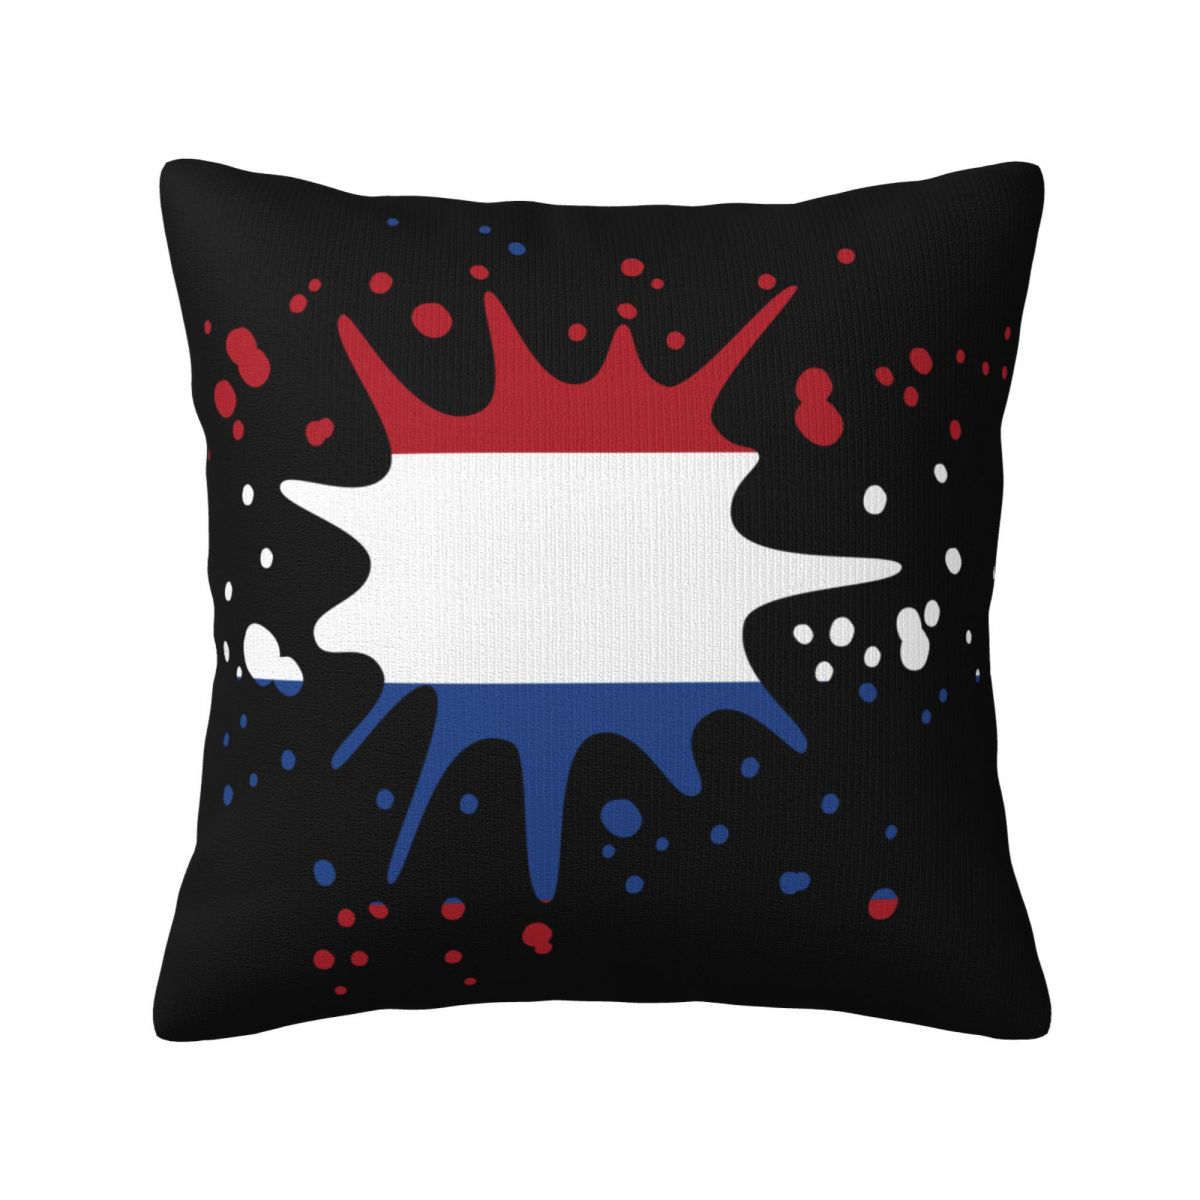 Netherlands Ink Spatter Throw Pillows 18 x 18 inch